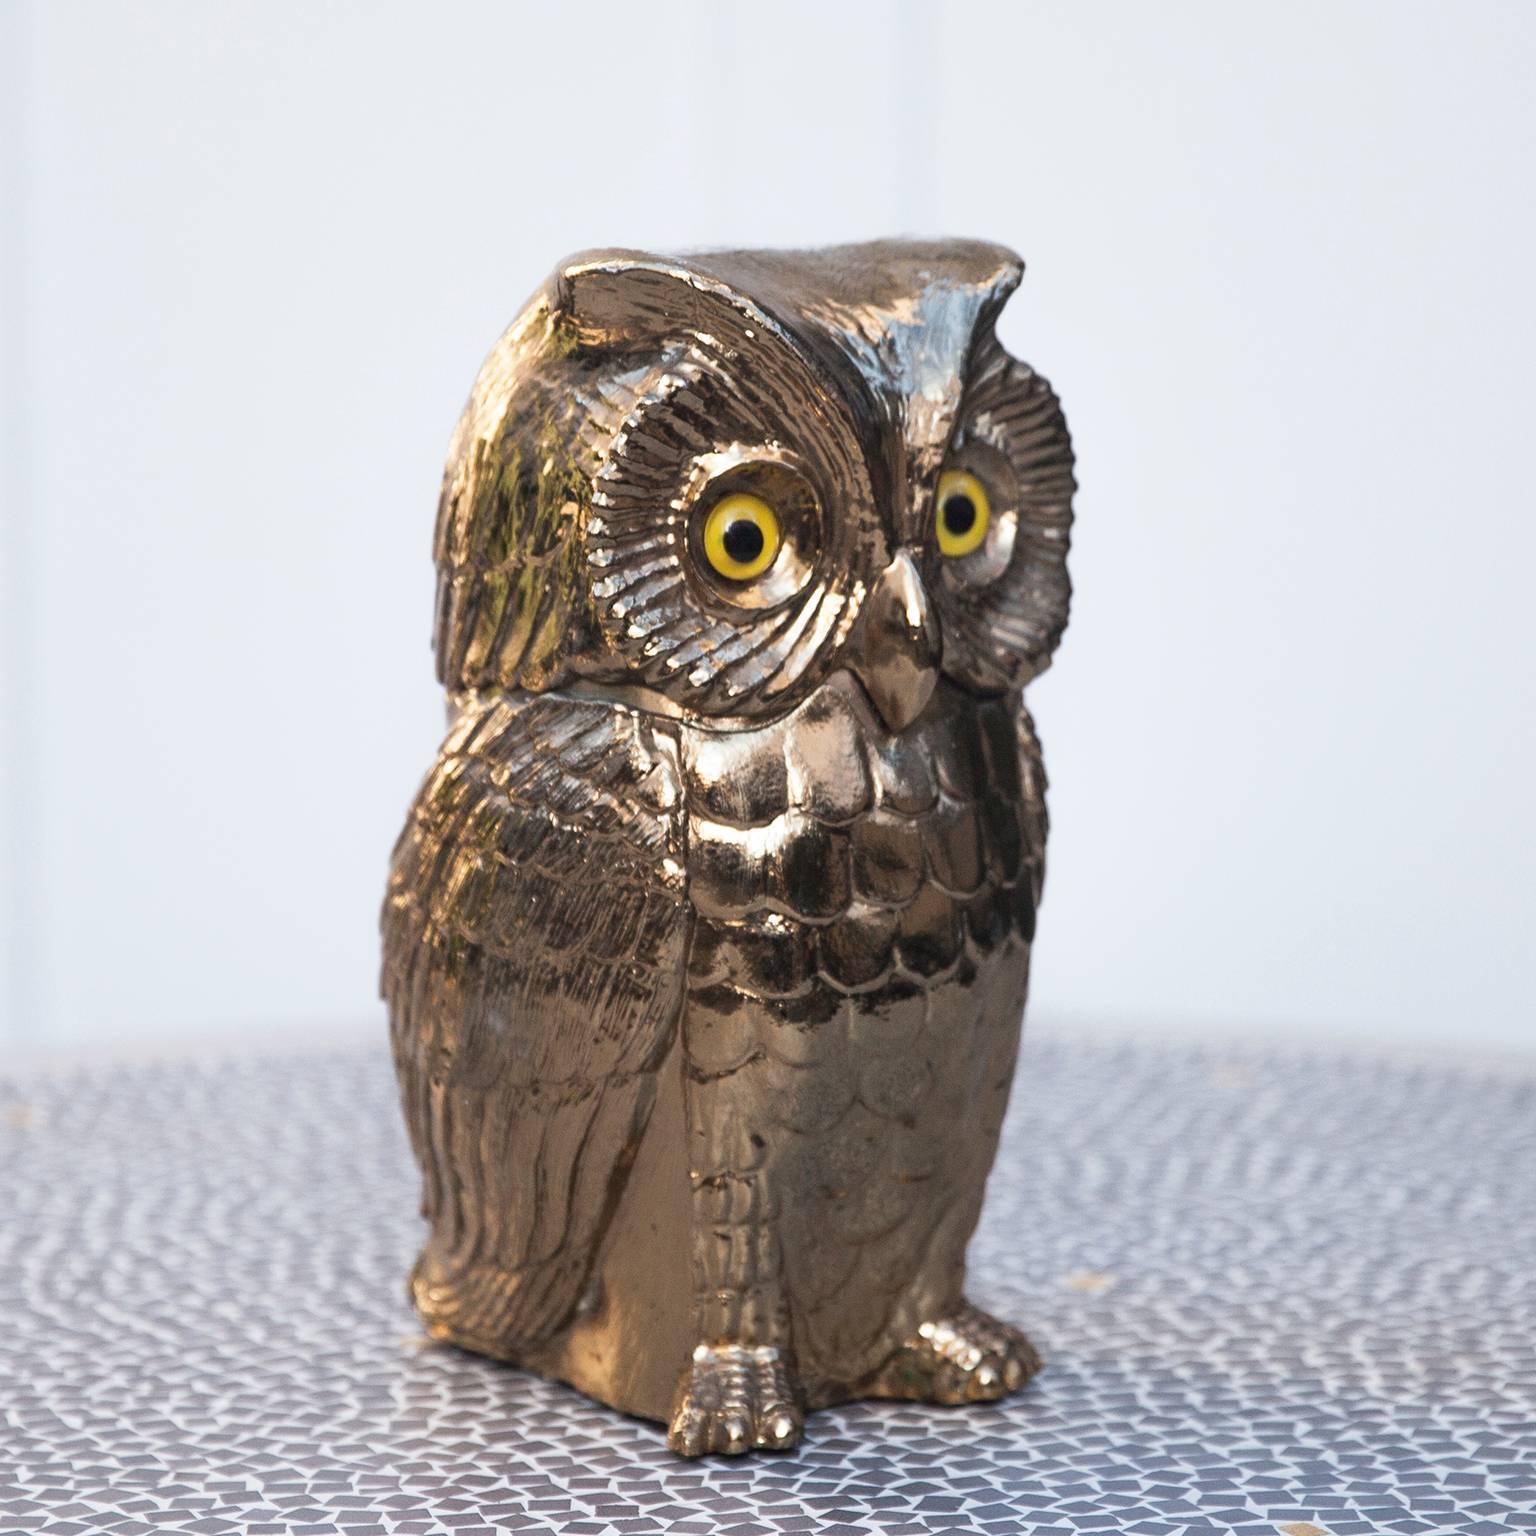 Beautiful gold colored Freddo Therm ice bucket in design of an owl with glass eyes from Switzerland, 1970s.
 